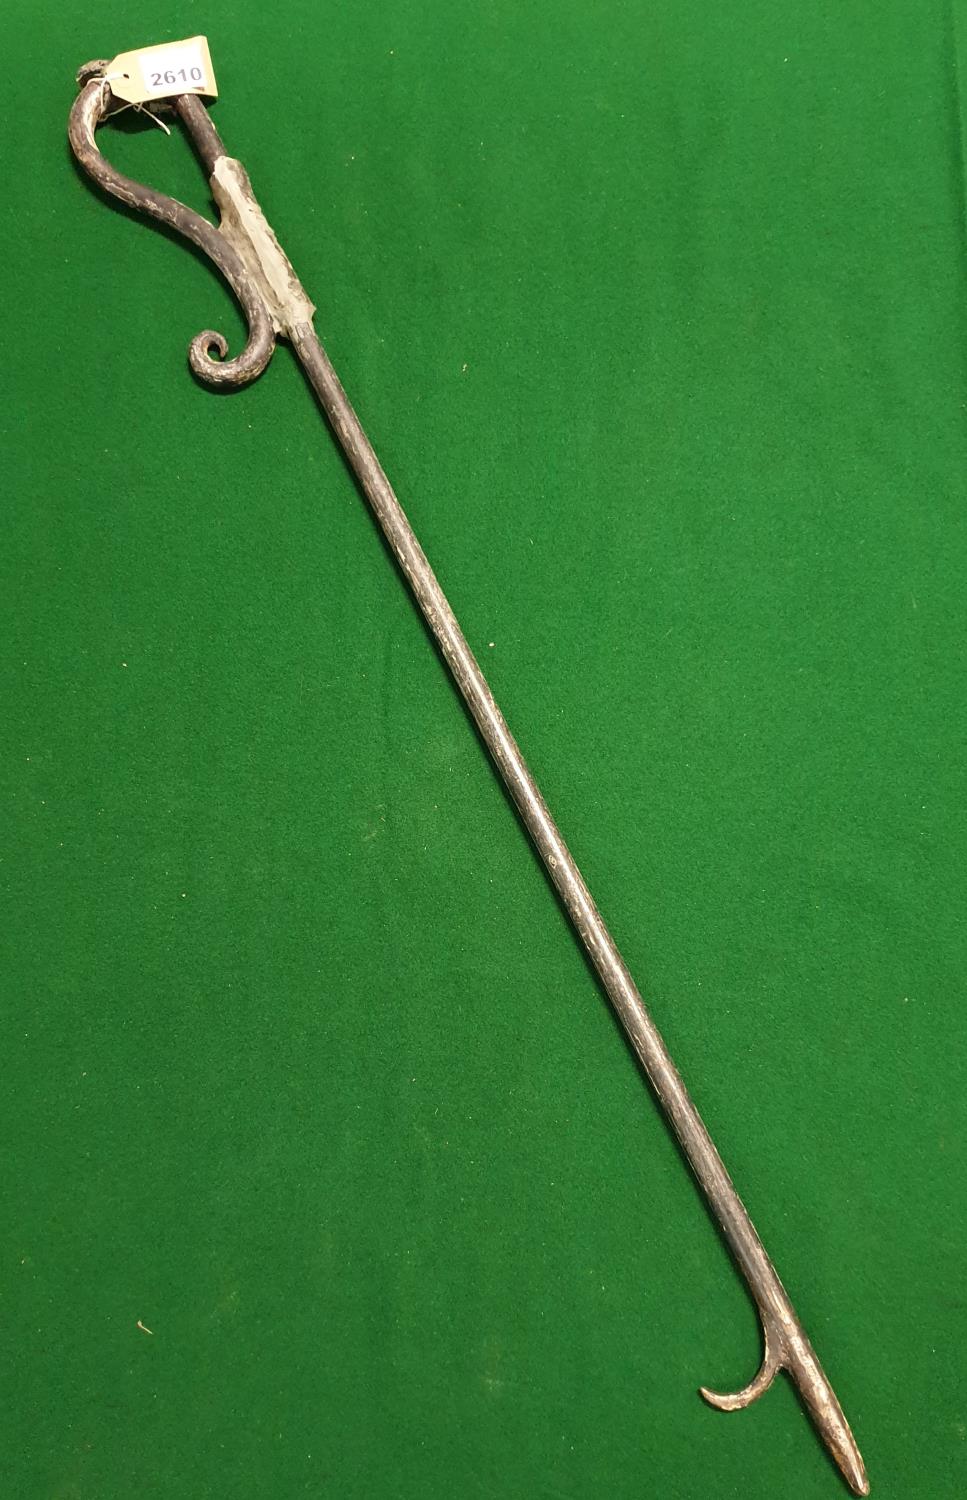 A Blind Swordsman Metal porker. "An Arms license is required if bought in Ireland". (1) (24) AP 134.